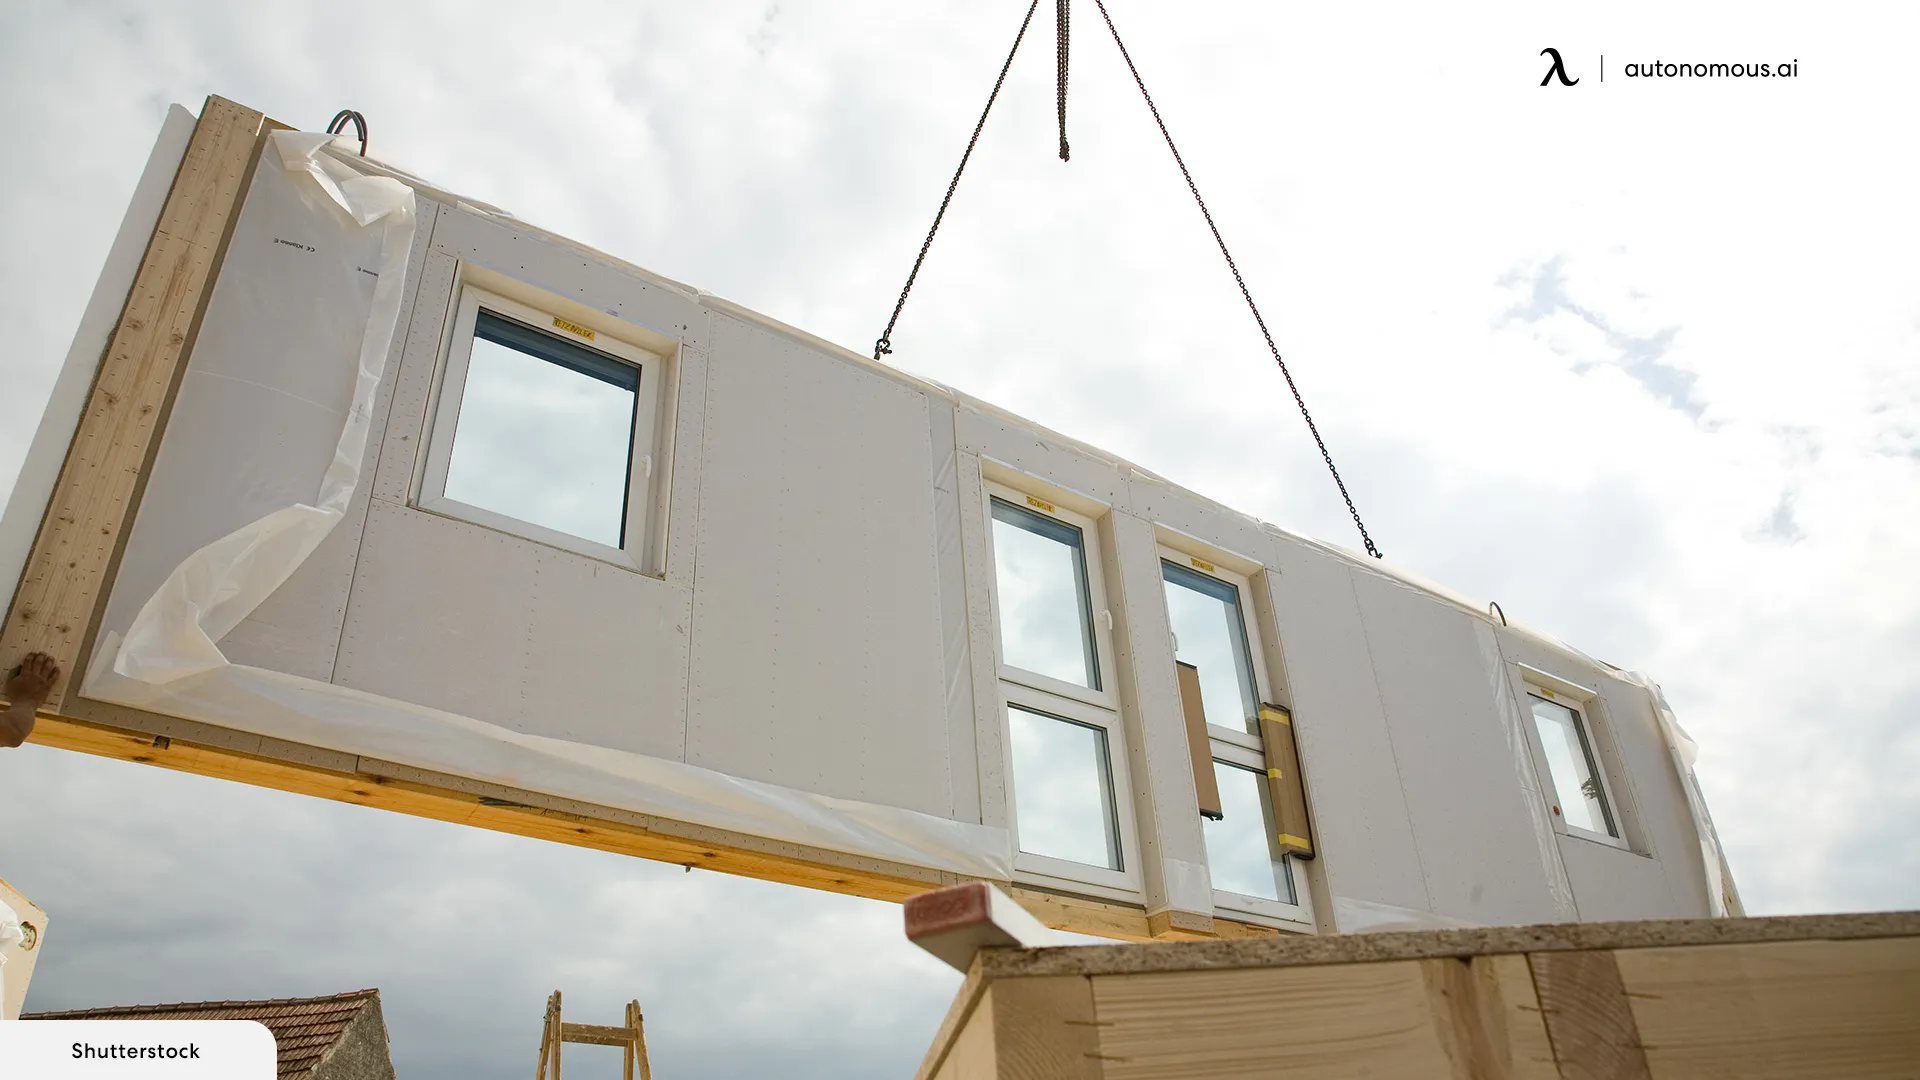 How Is a Prefab Building Made?